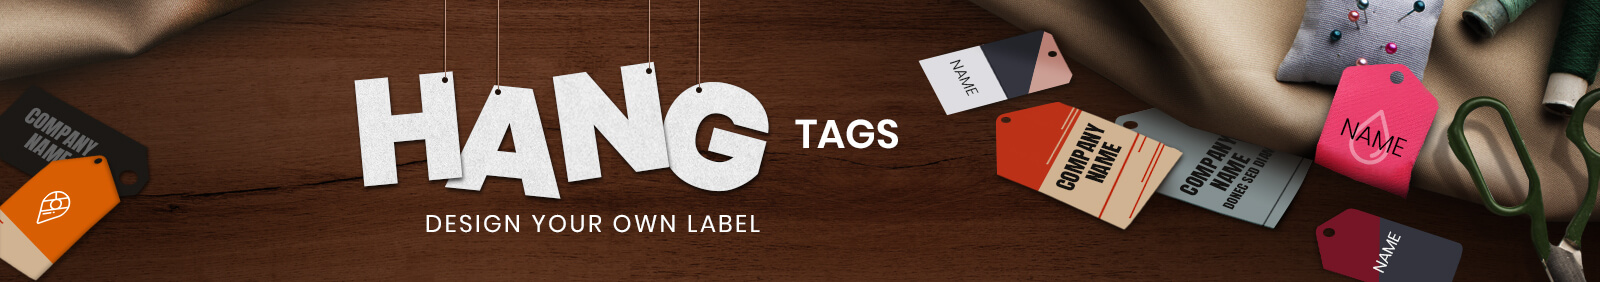 hanged tag banner2